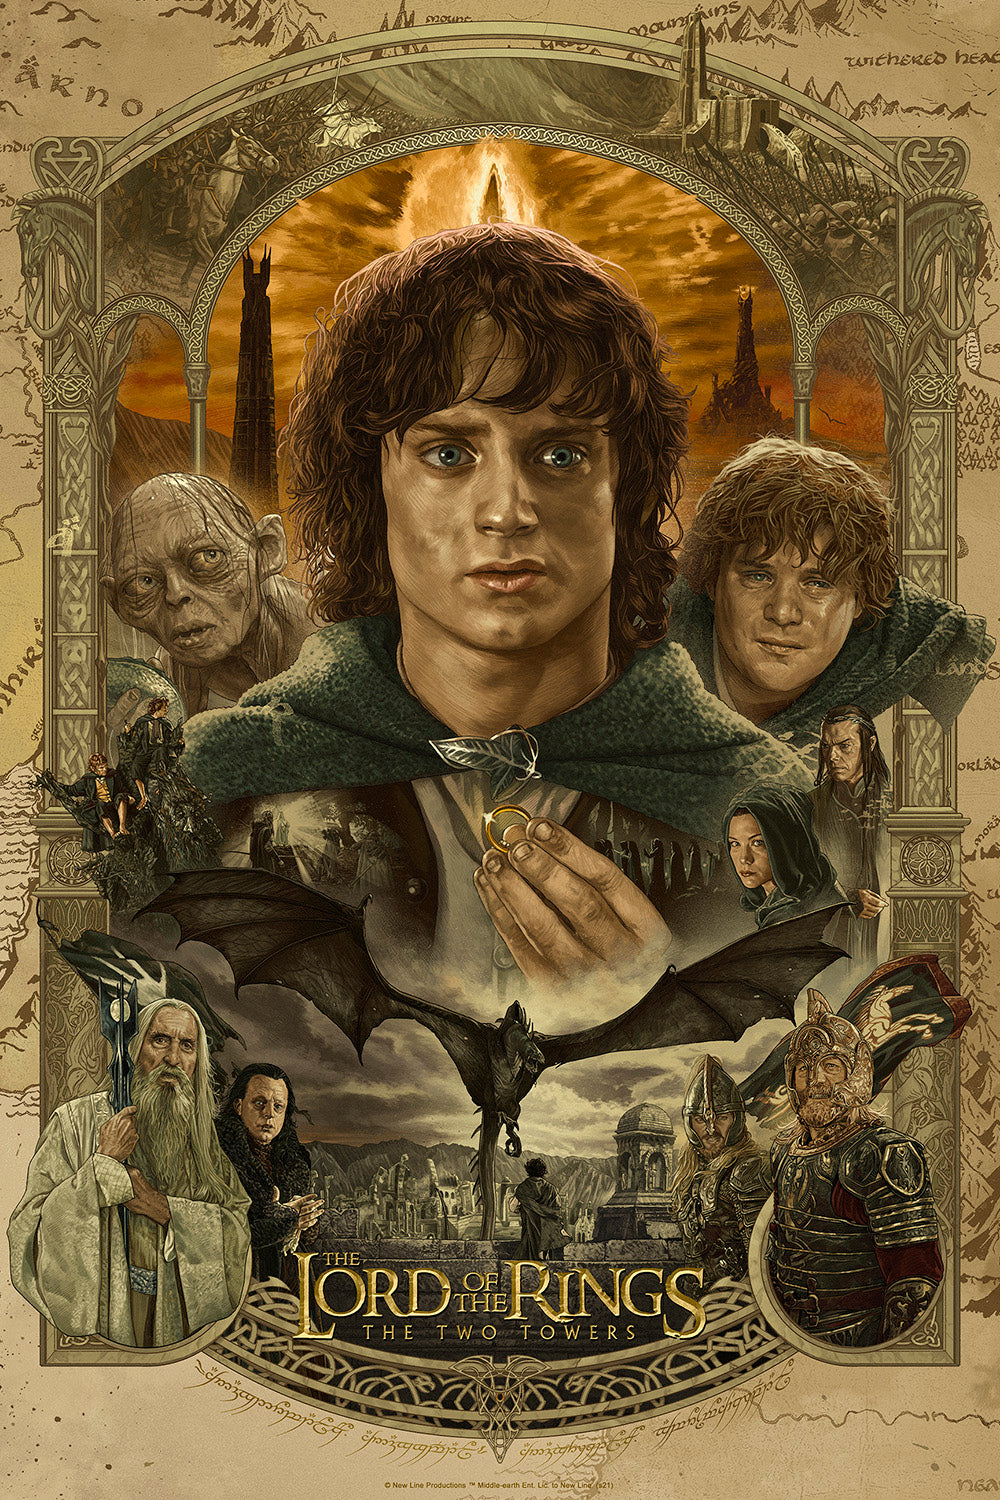 Juan Burgos "The Lord of the Rings: The Two Towers" Variant